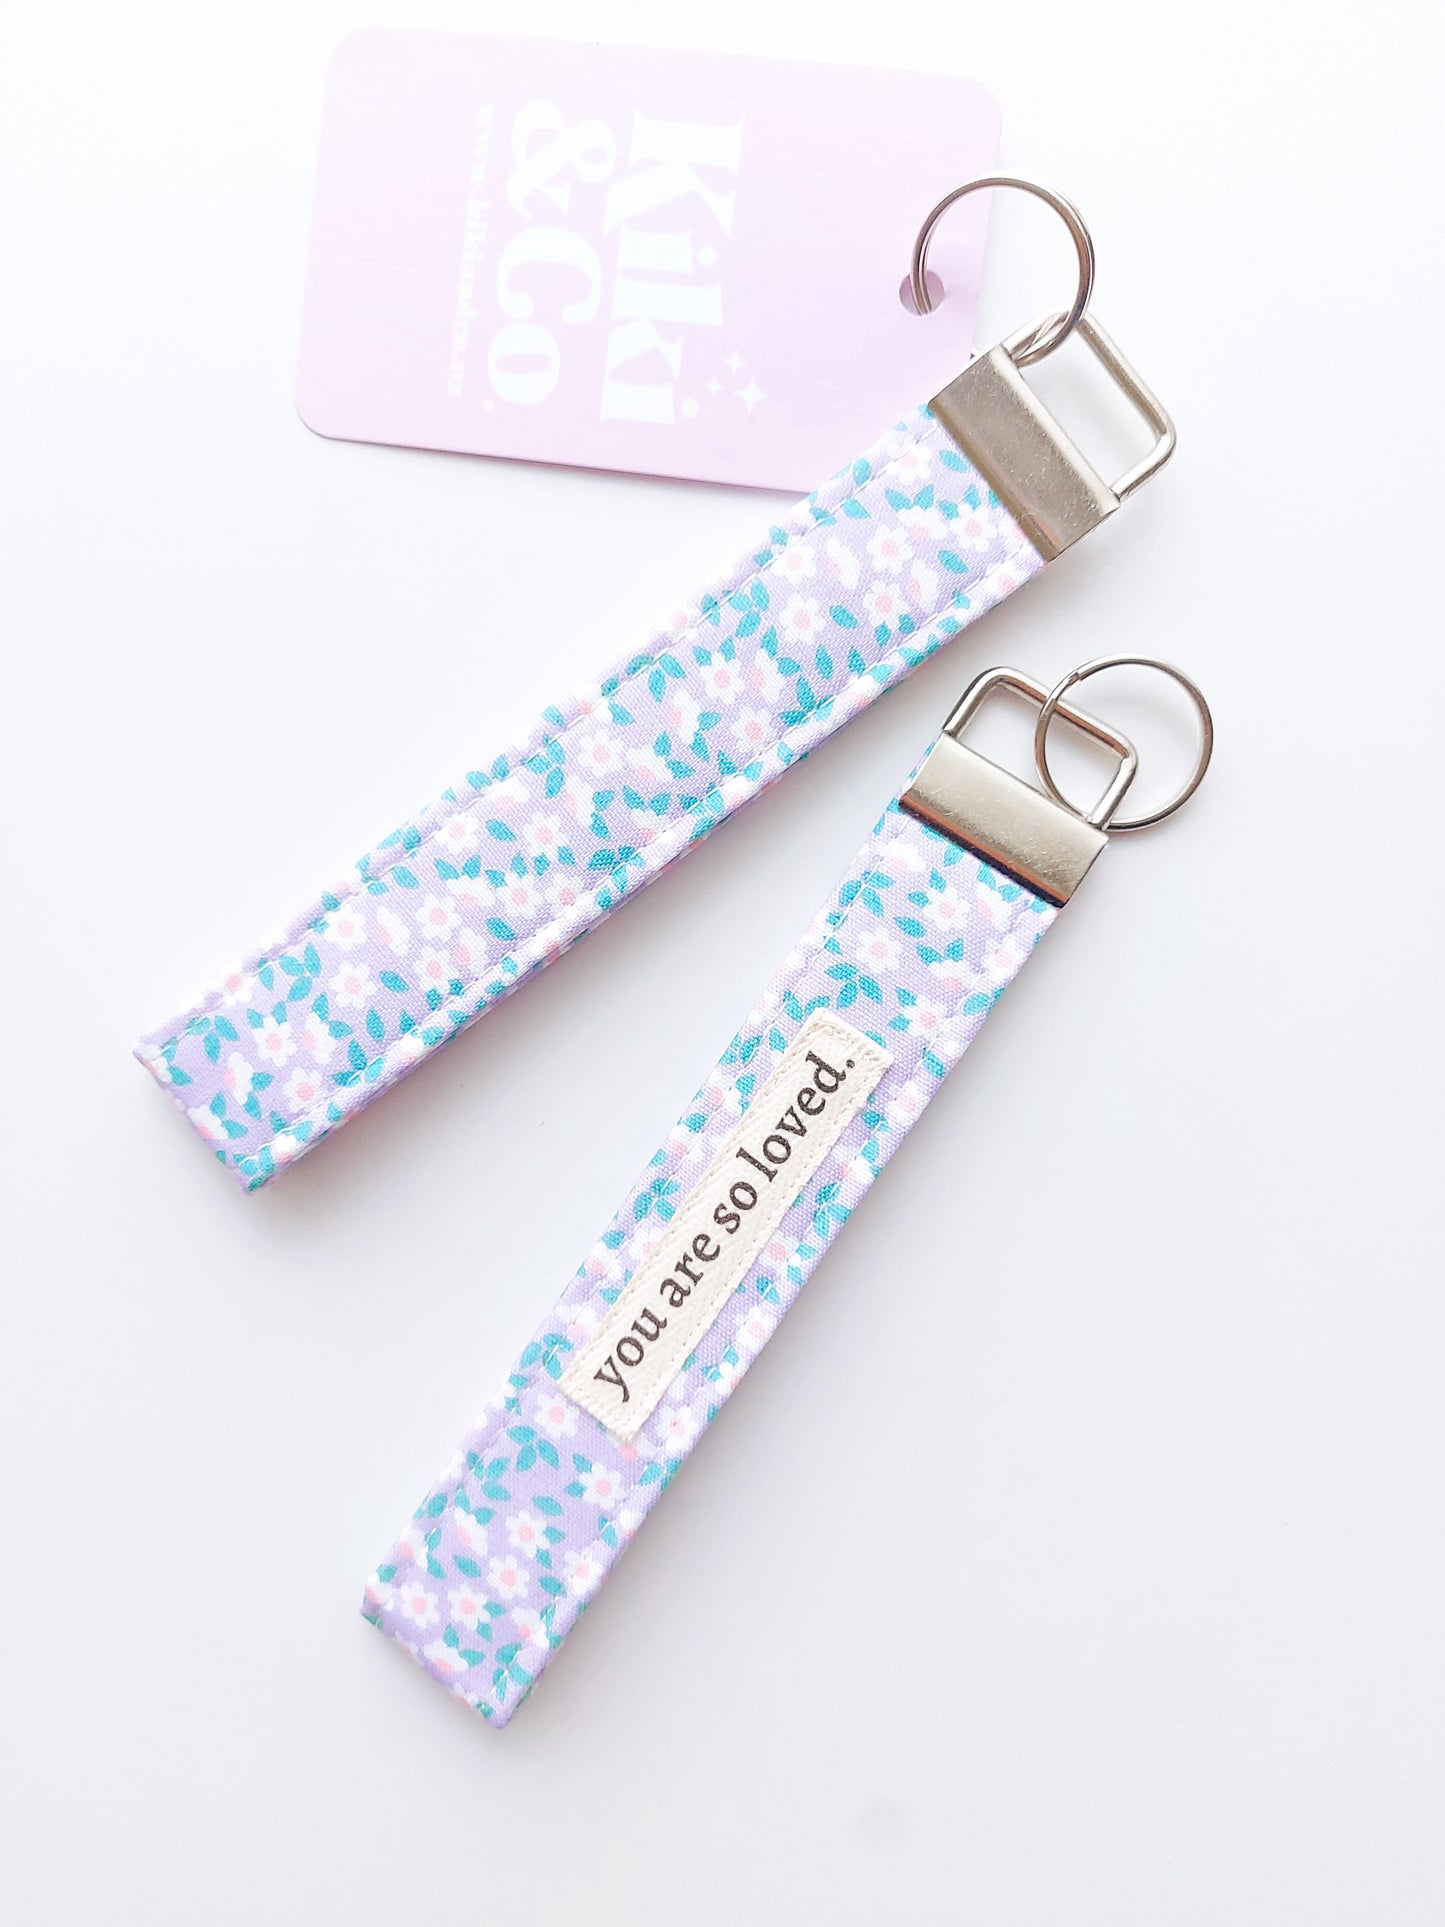 NEW Keychain - Petite Lavender Floral